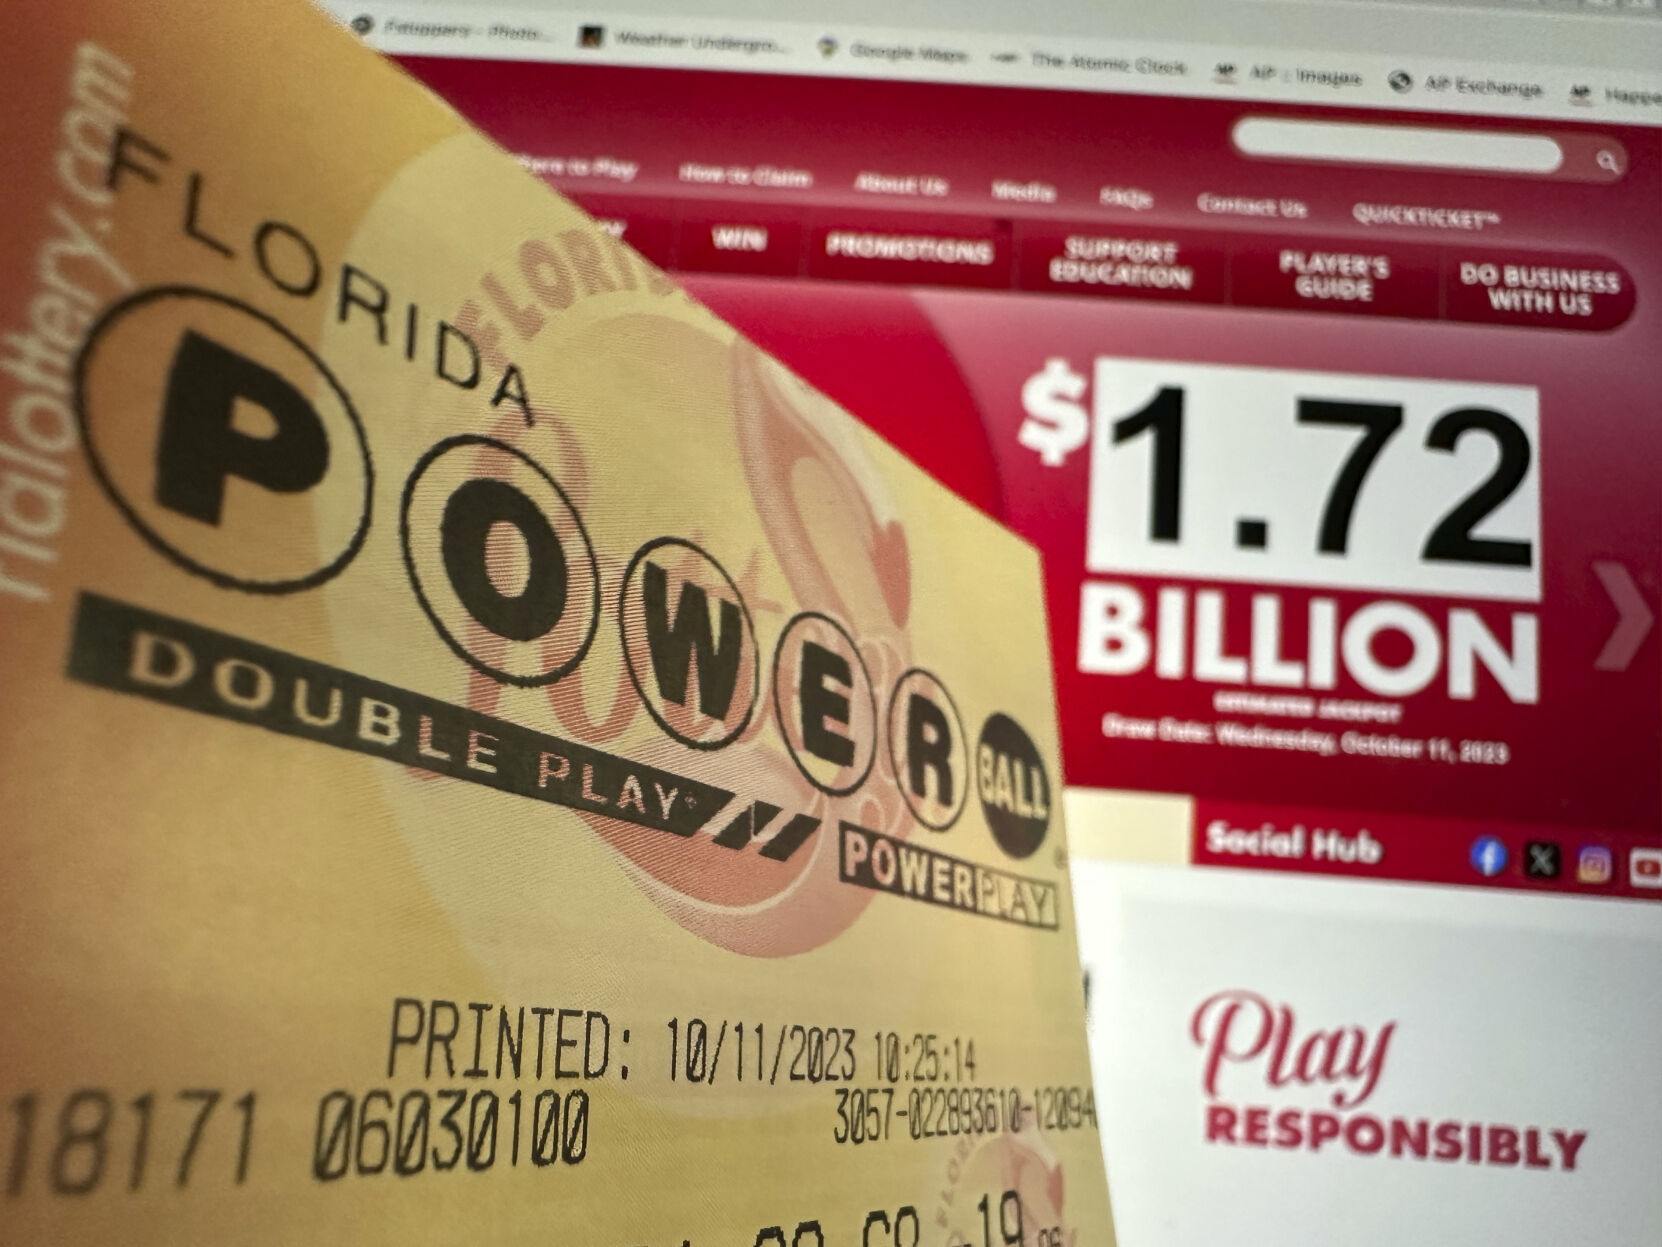 <p>A Powerball lottery ticket is shown, Wednesday, Oct. 11, 2023, in Surfside, Fla. After 35 straight drawings without a big winner, Powerball players are lining up for a shot at a near-record jackpot worth an estimated $1.73 billion. (AP Photo/Wilfredo Lee)</p>   PHOTO CREDIT: Wilfredo Lee 